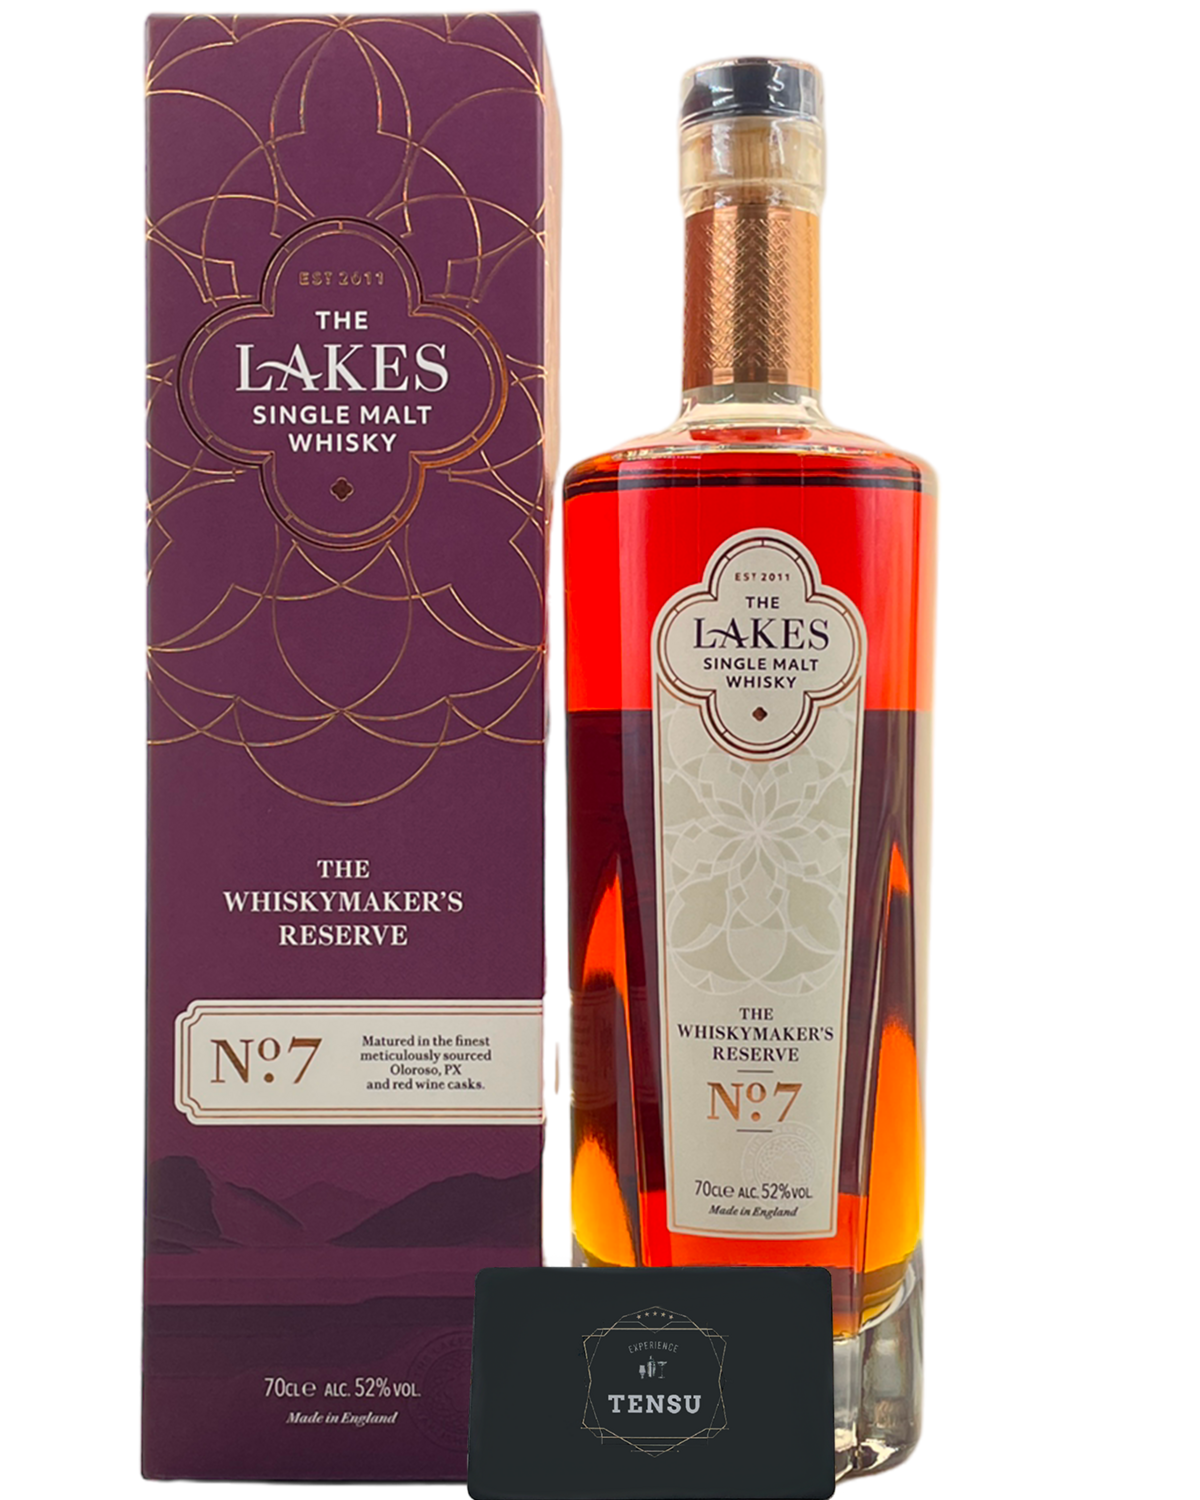 The Lakes - The Whiskymaker's Reserve No.7 52.0 "The Lakes Distillery"